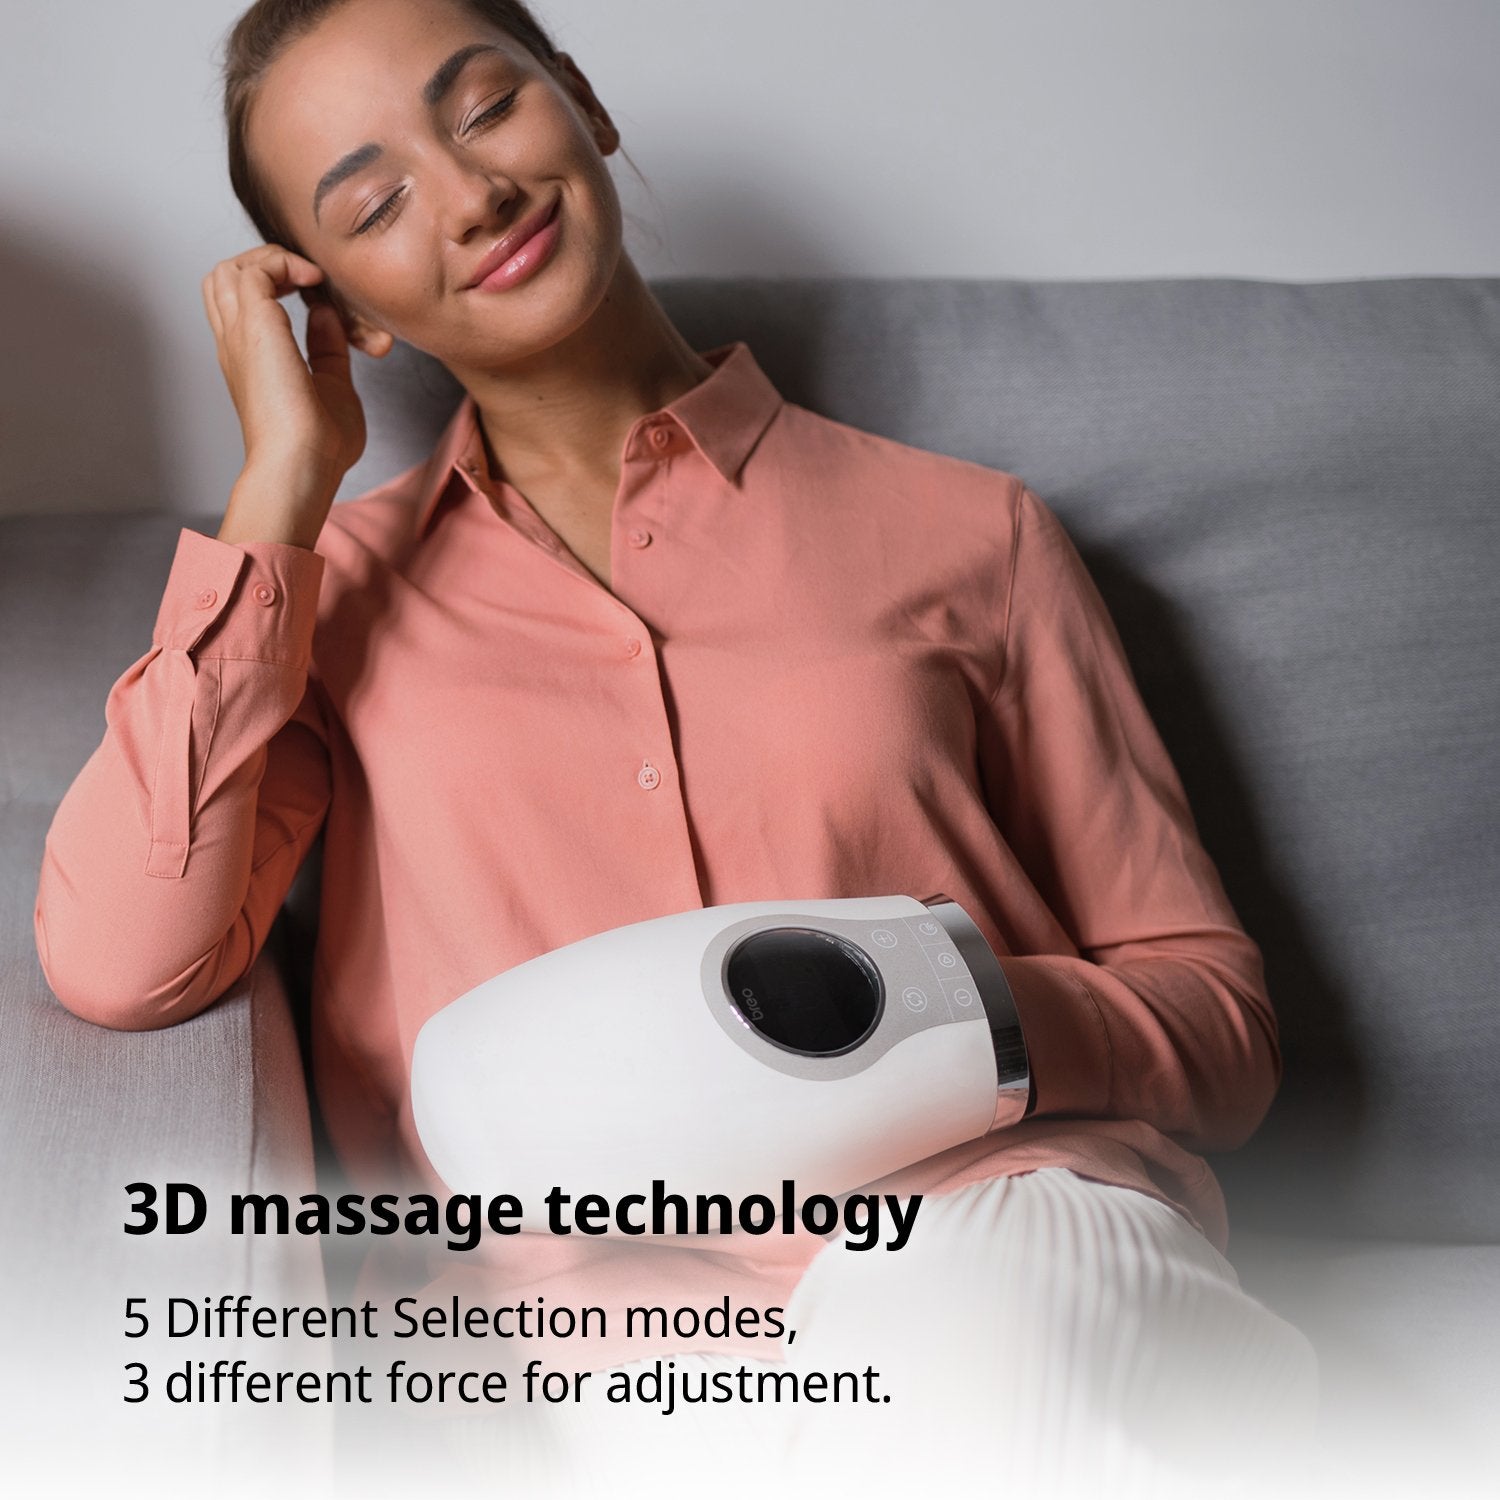 Breo Portable 3D message Technology